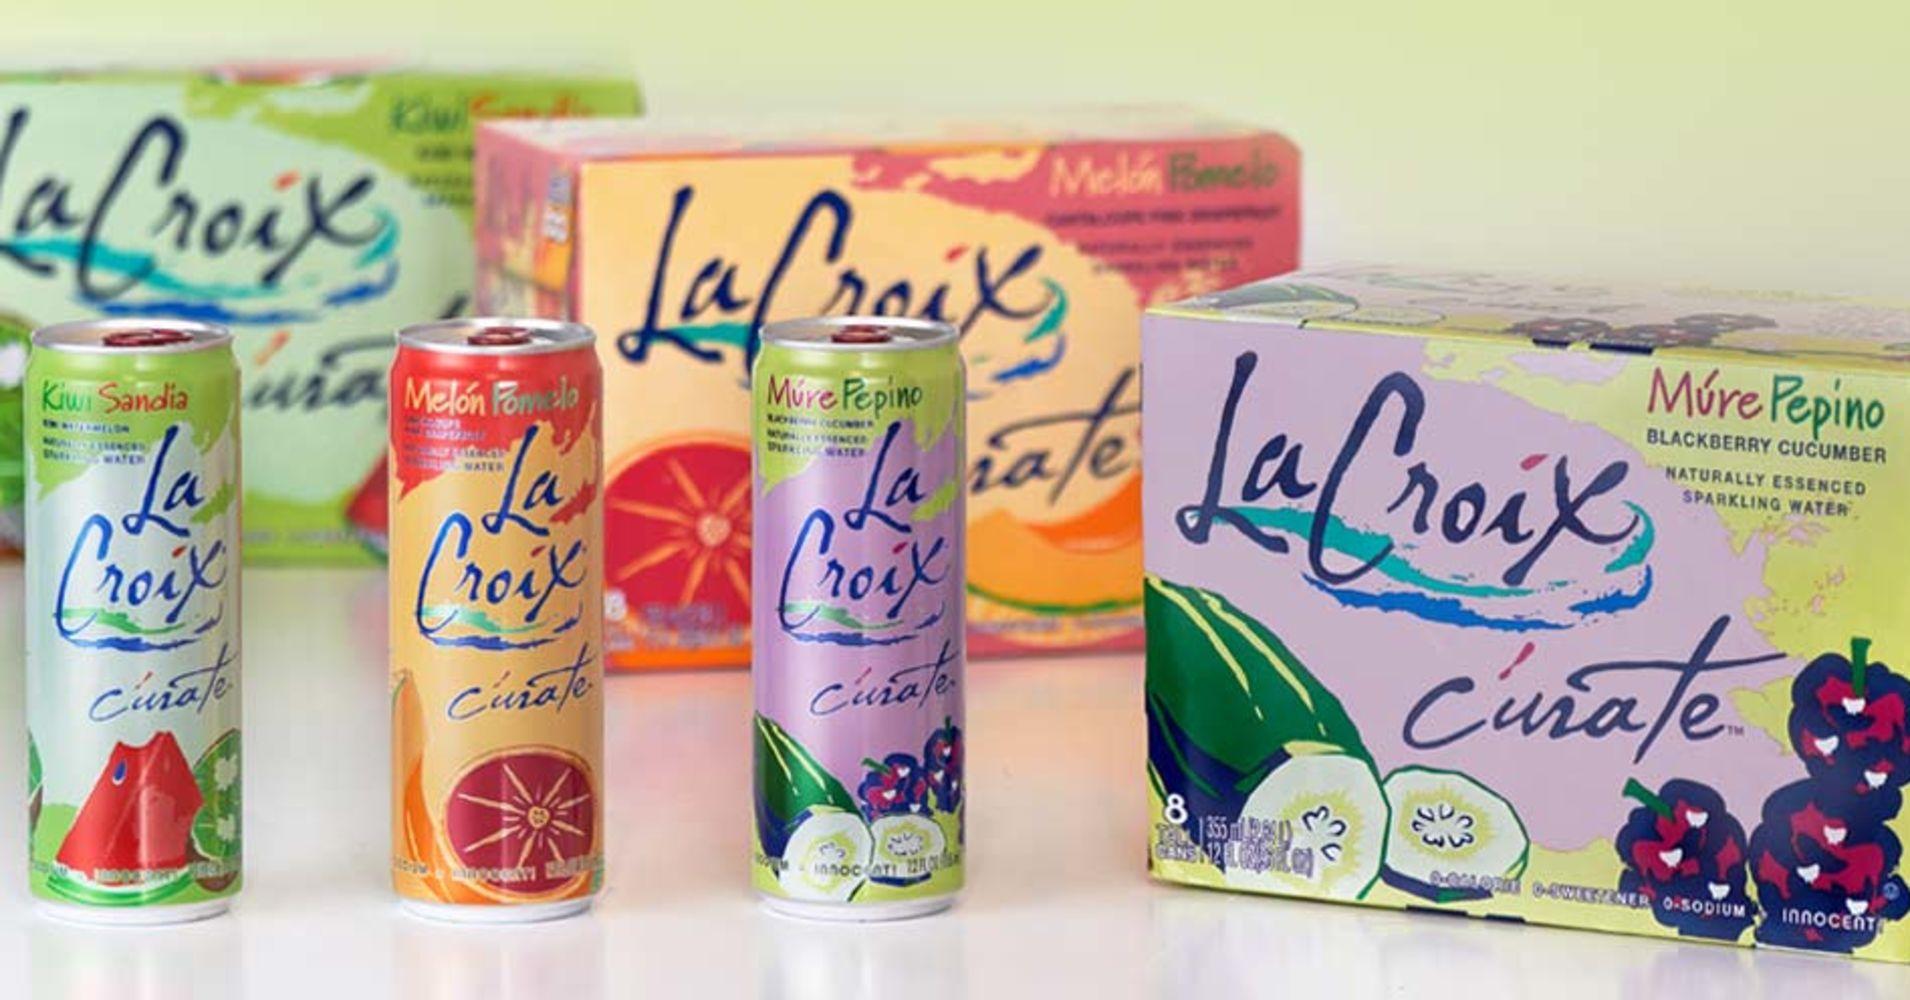 Amazon just made it harder and more expensive to buy LaCroix